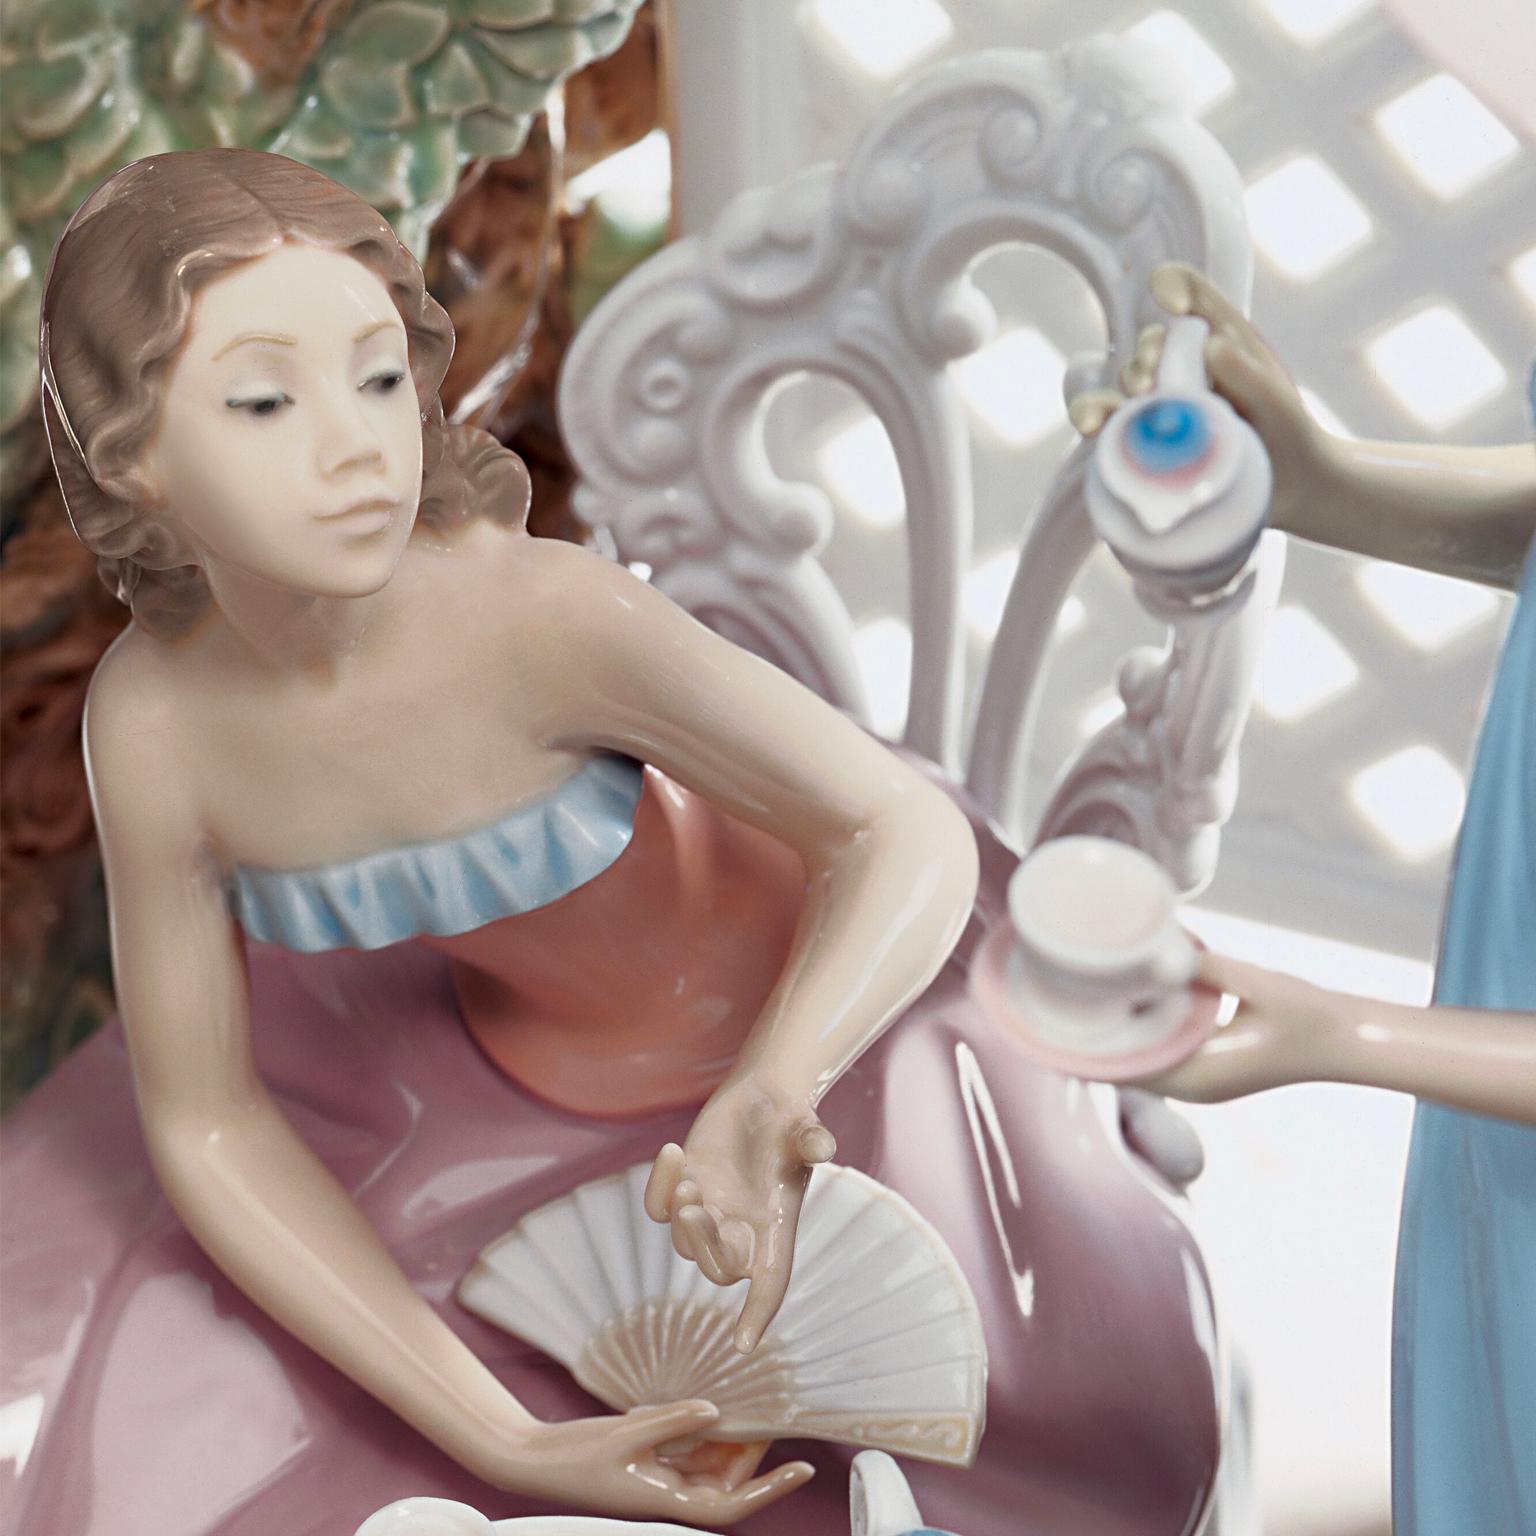 Limited edition sculpture of women drinking tea, decorated with handmade gloss finish porcelain flowers.
Lladró figurines often reference a timeless Romanticism, an undefined but still extremely familiar world in space and time. Here, we find all